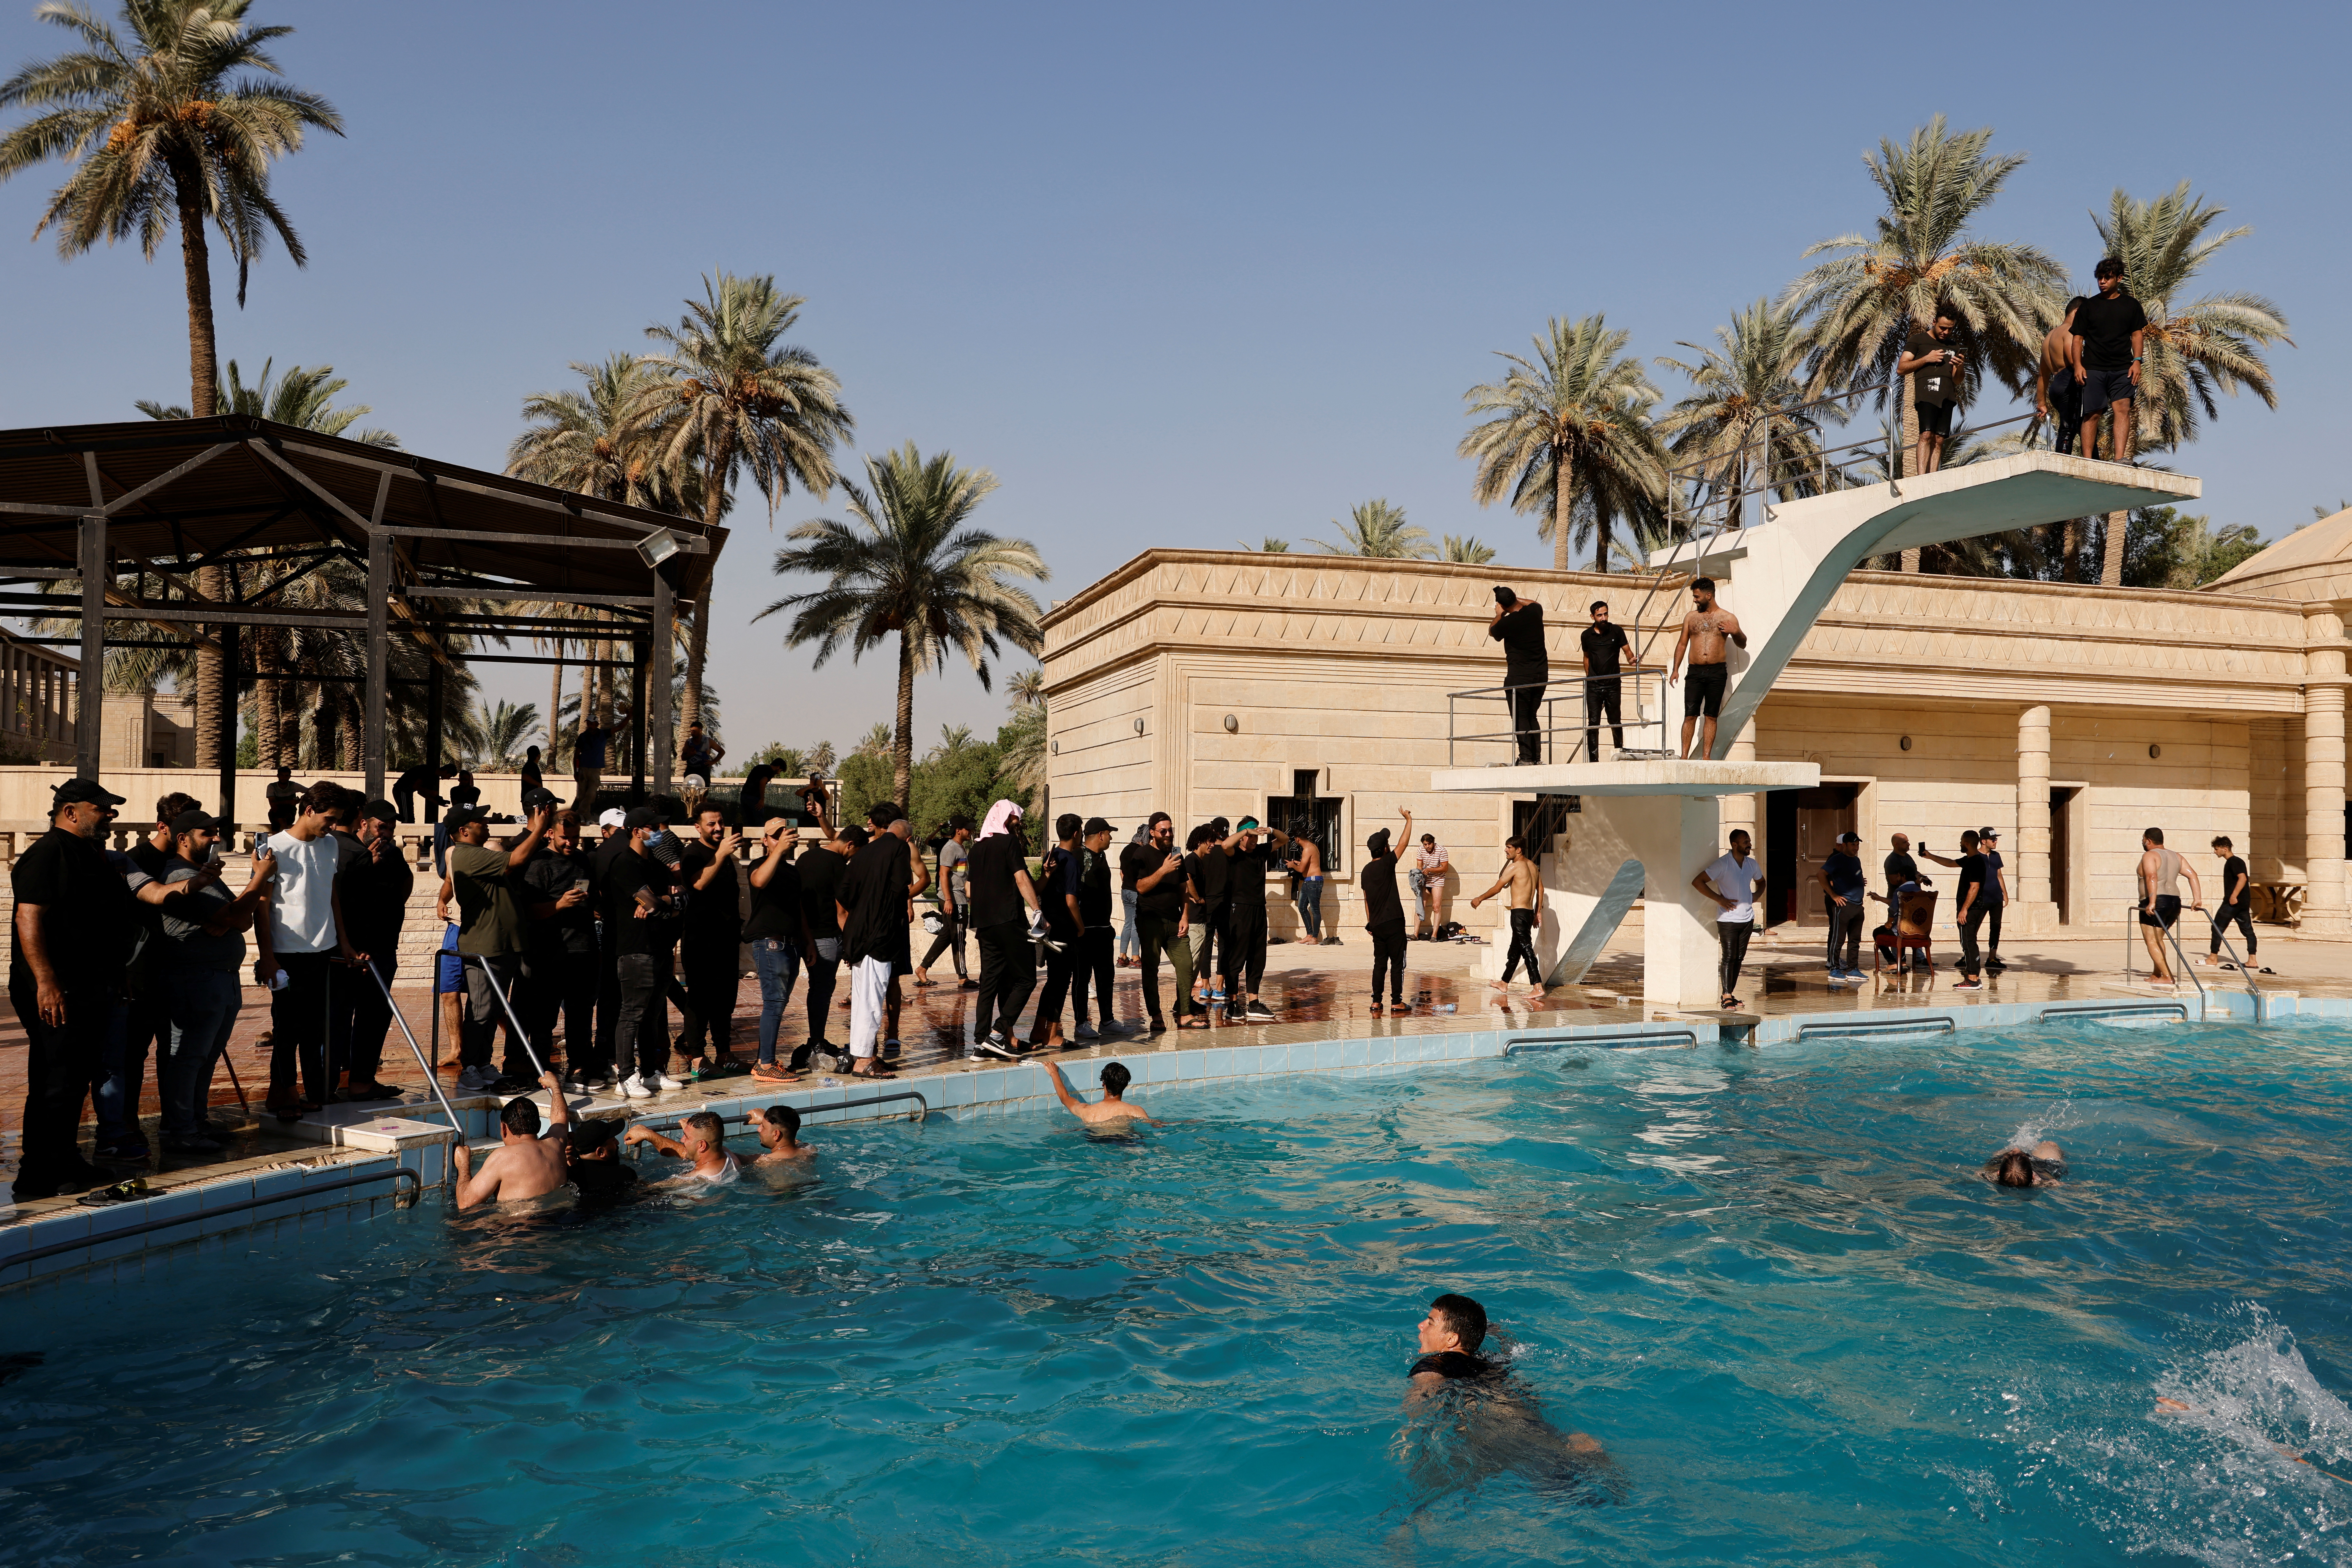 Supporters of Iraqi populist leader Moqtada al-Sadr protest inside the Republican Palace in the Green Zone, in Baghdad